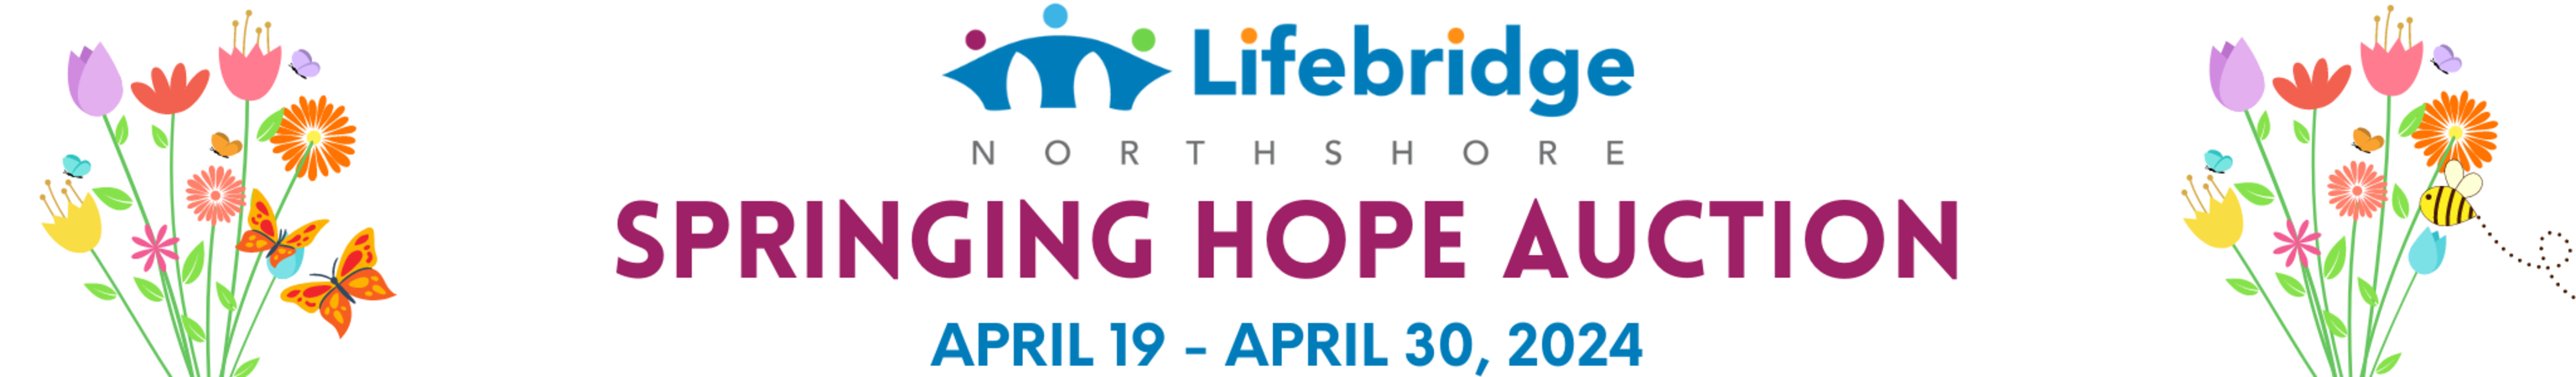 Join us at Lifebridge Northshore's Springing Hope Auction Event from April 19 - April 30, 2024. Decked in vibrant flower designs, our banner reflects the spirit of spring!